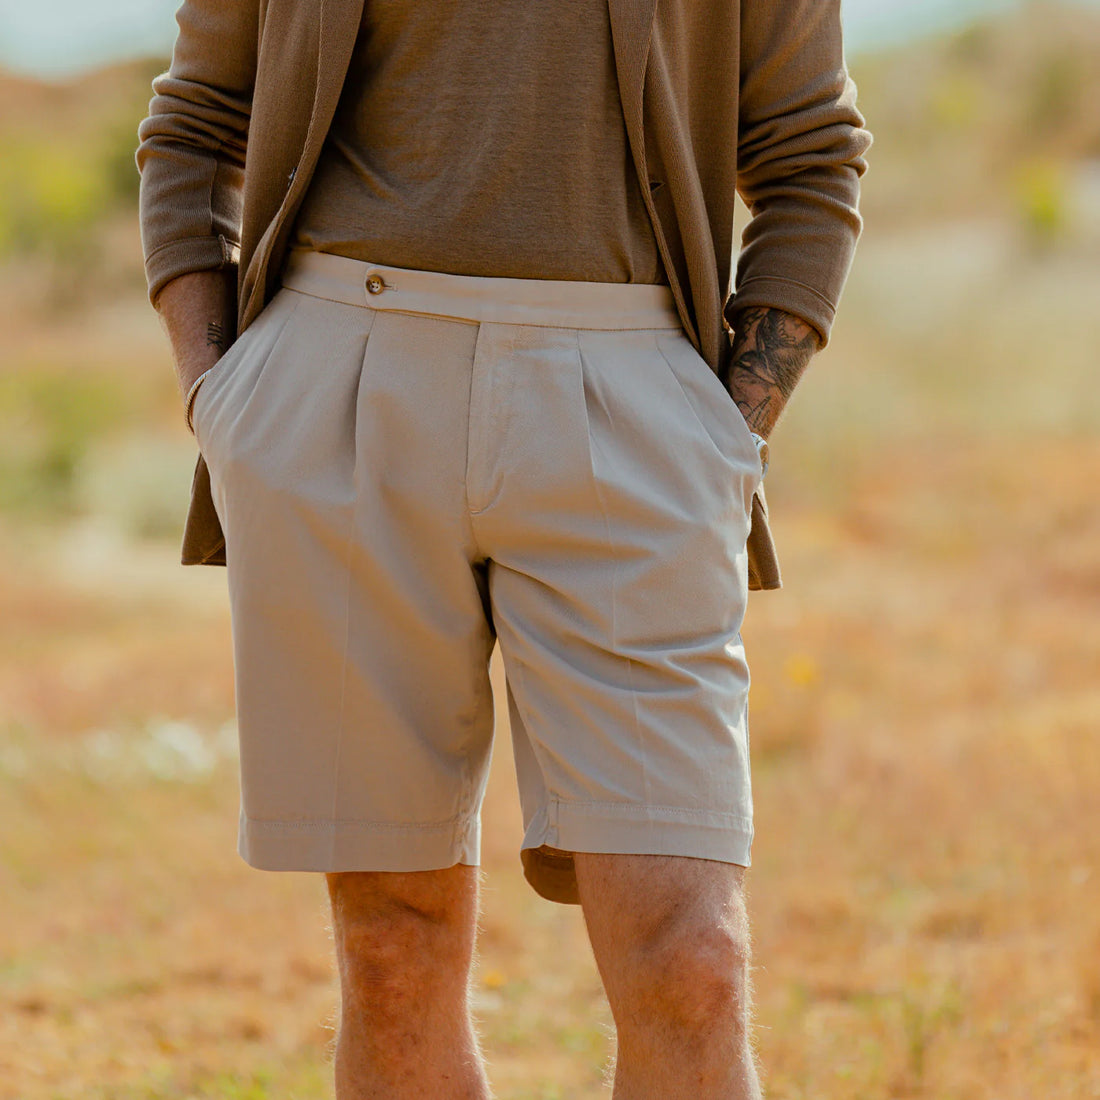 A man standing outdoors wearing a brown jacket and beige shorts.